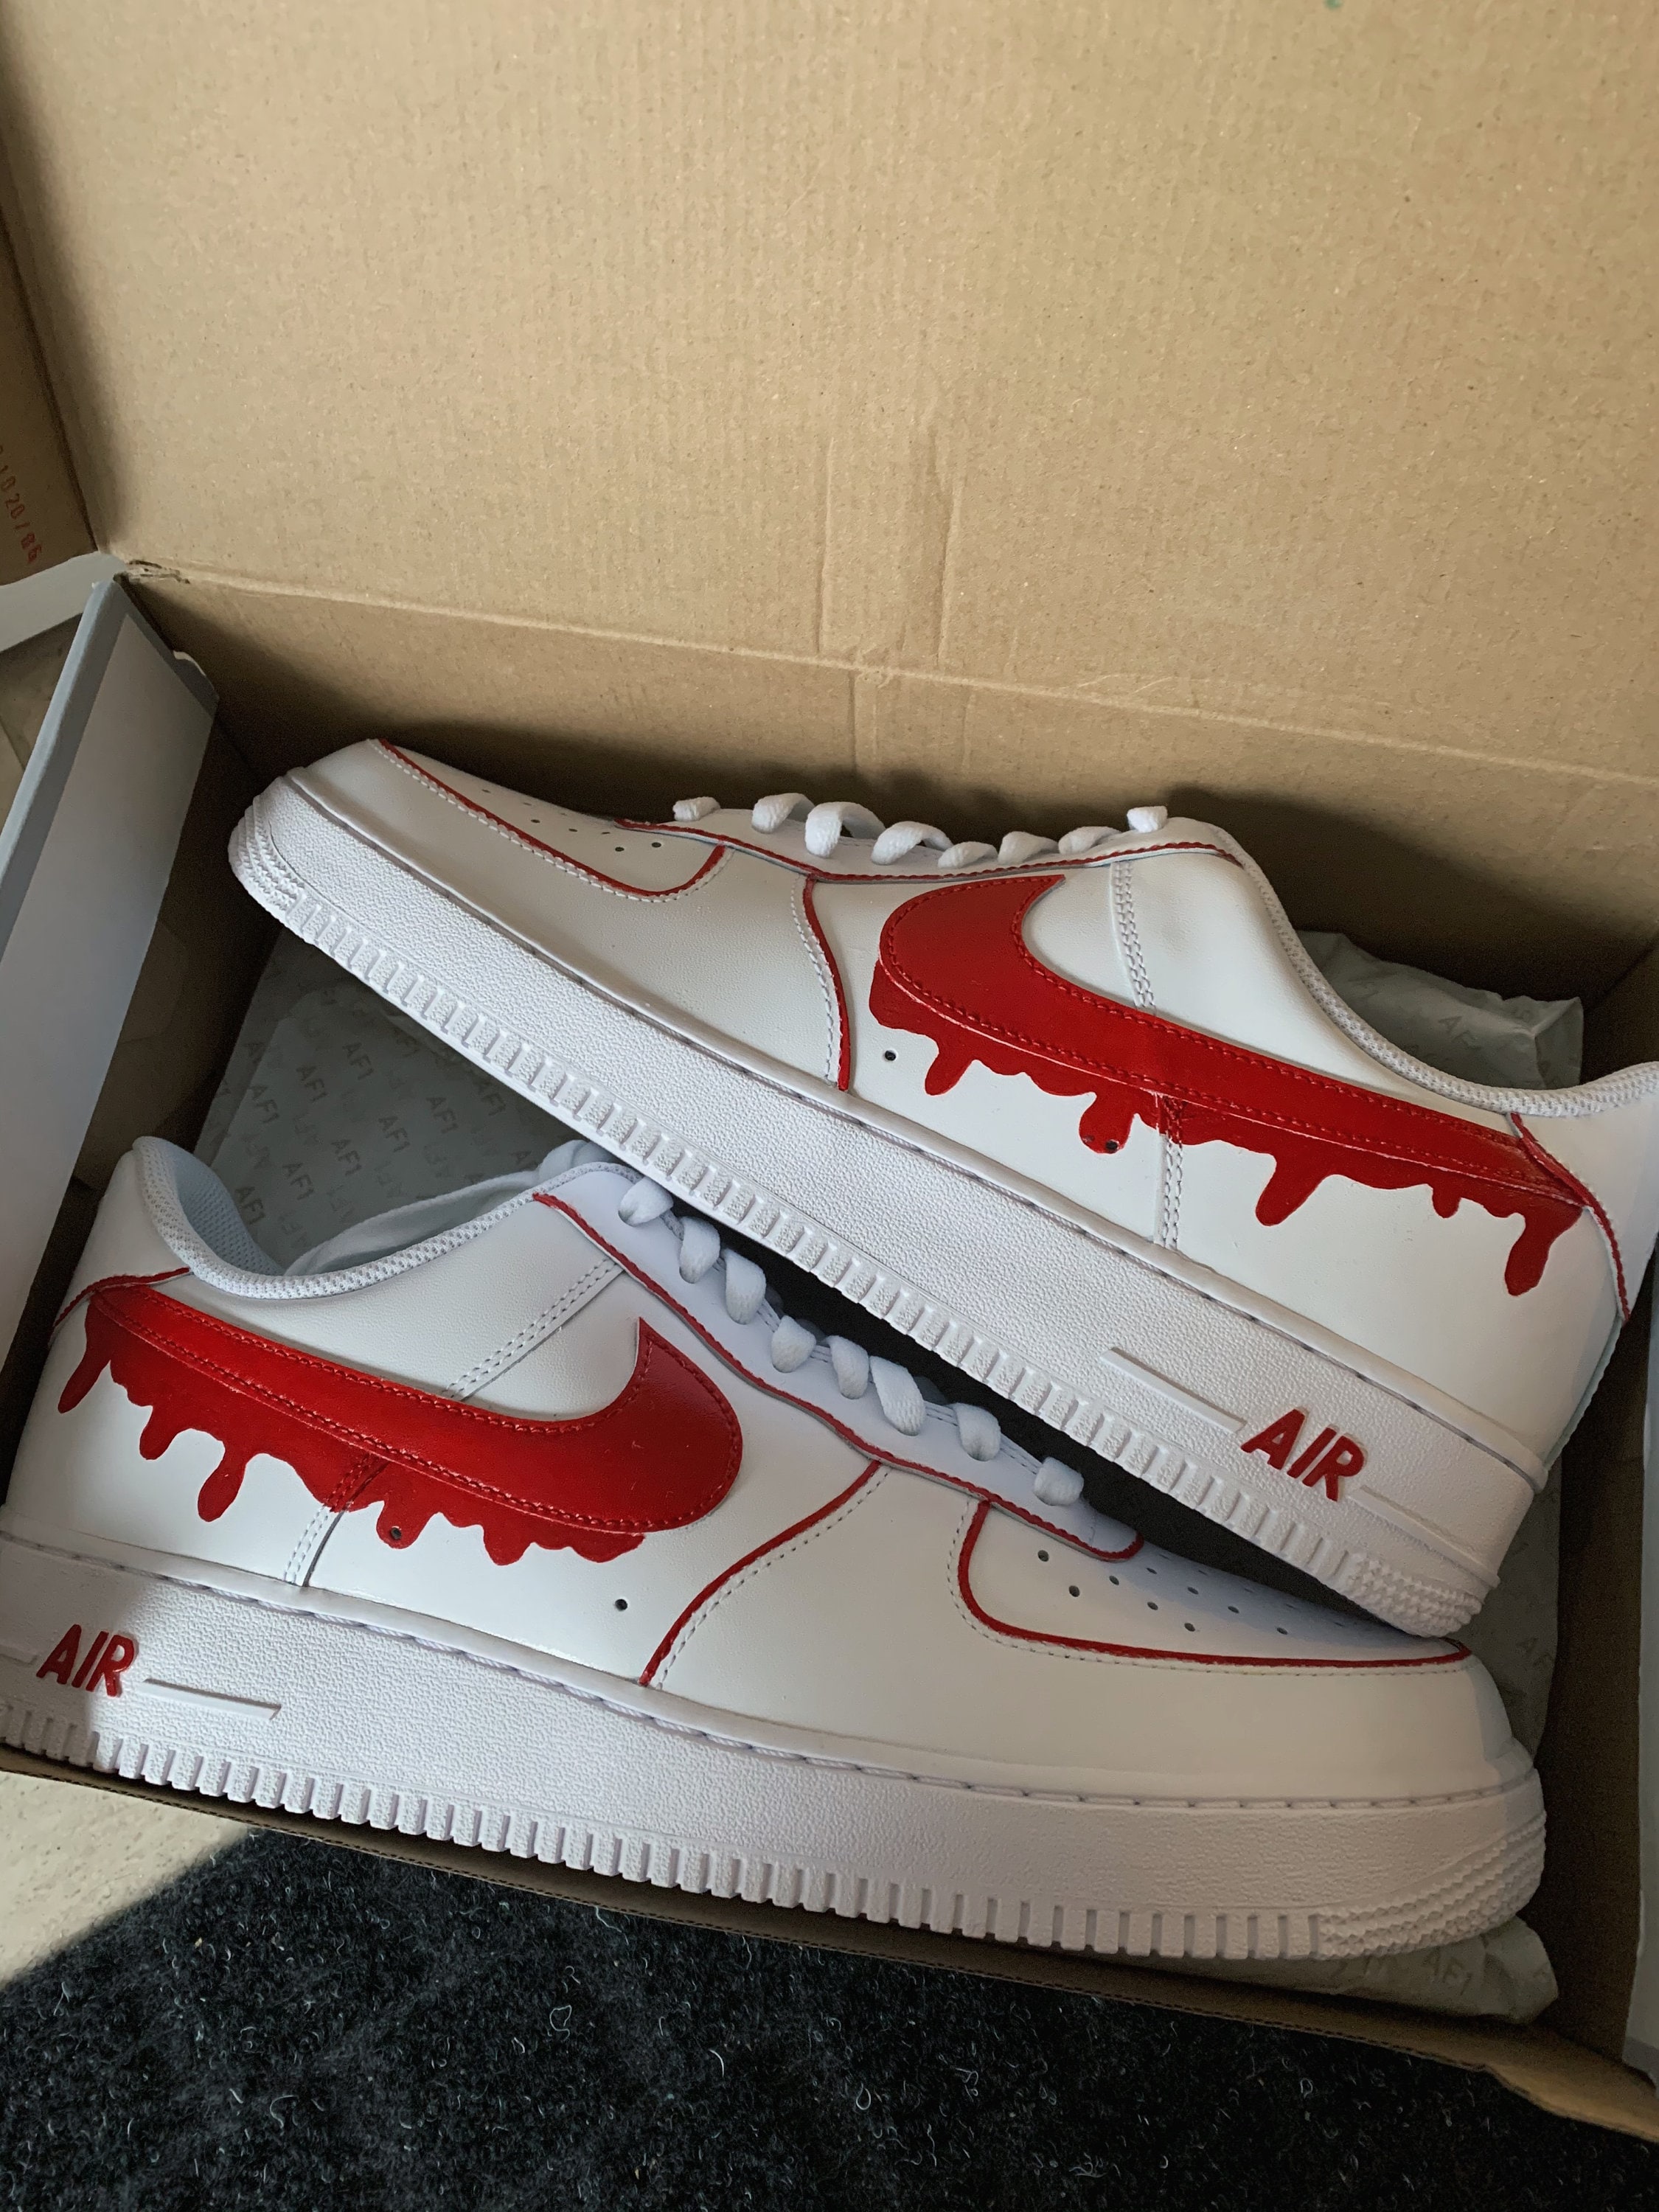 custom red air force 1 with rope｜TikTok Search